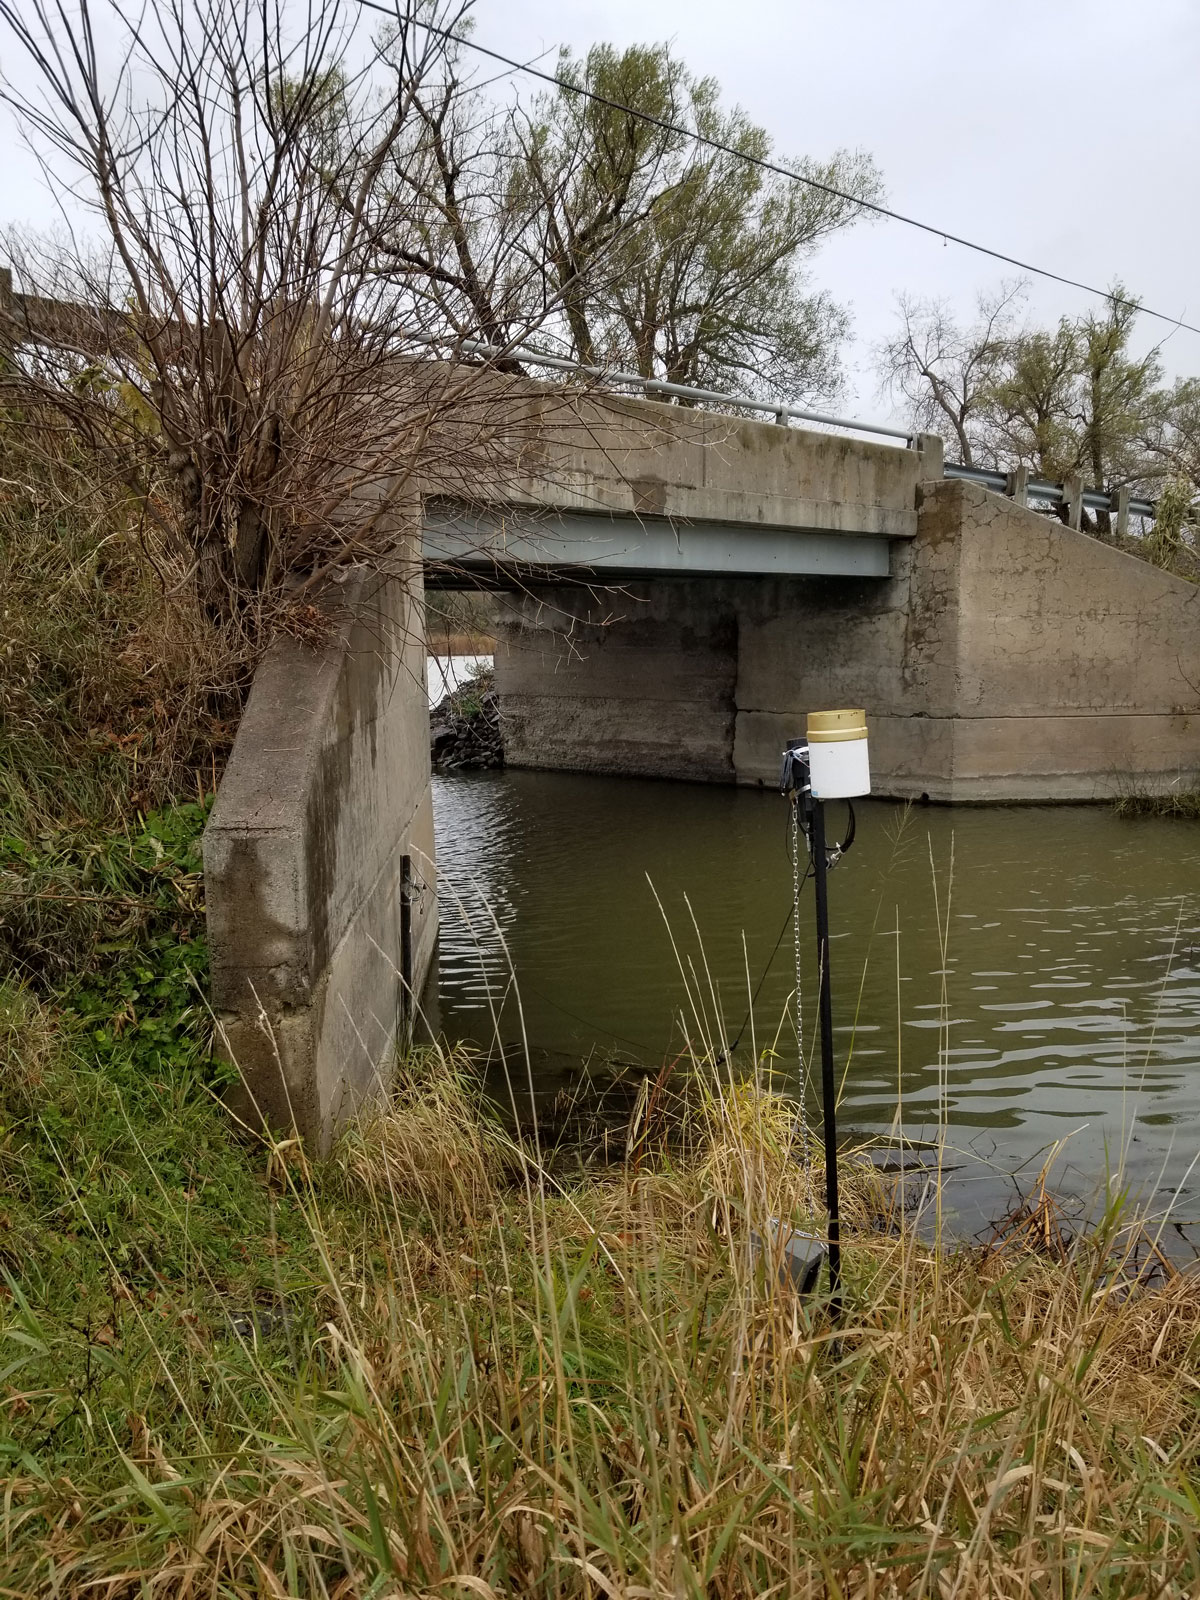 solinst levelsender telemetry system installed in a river to record water level data